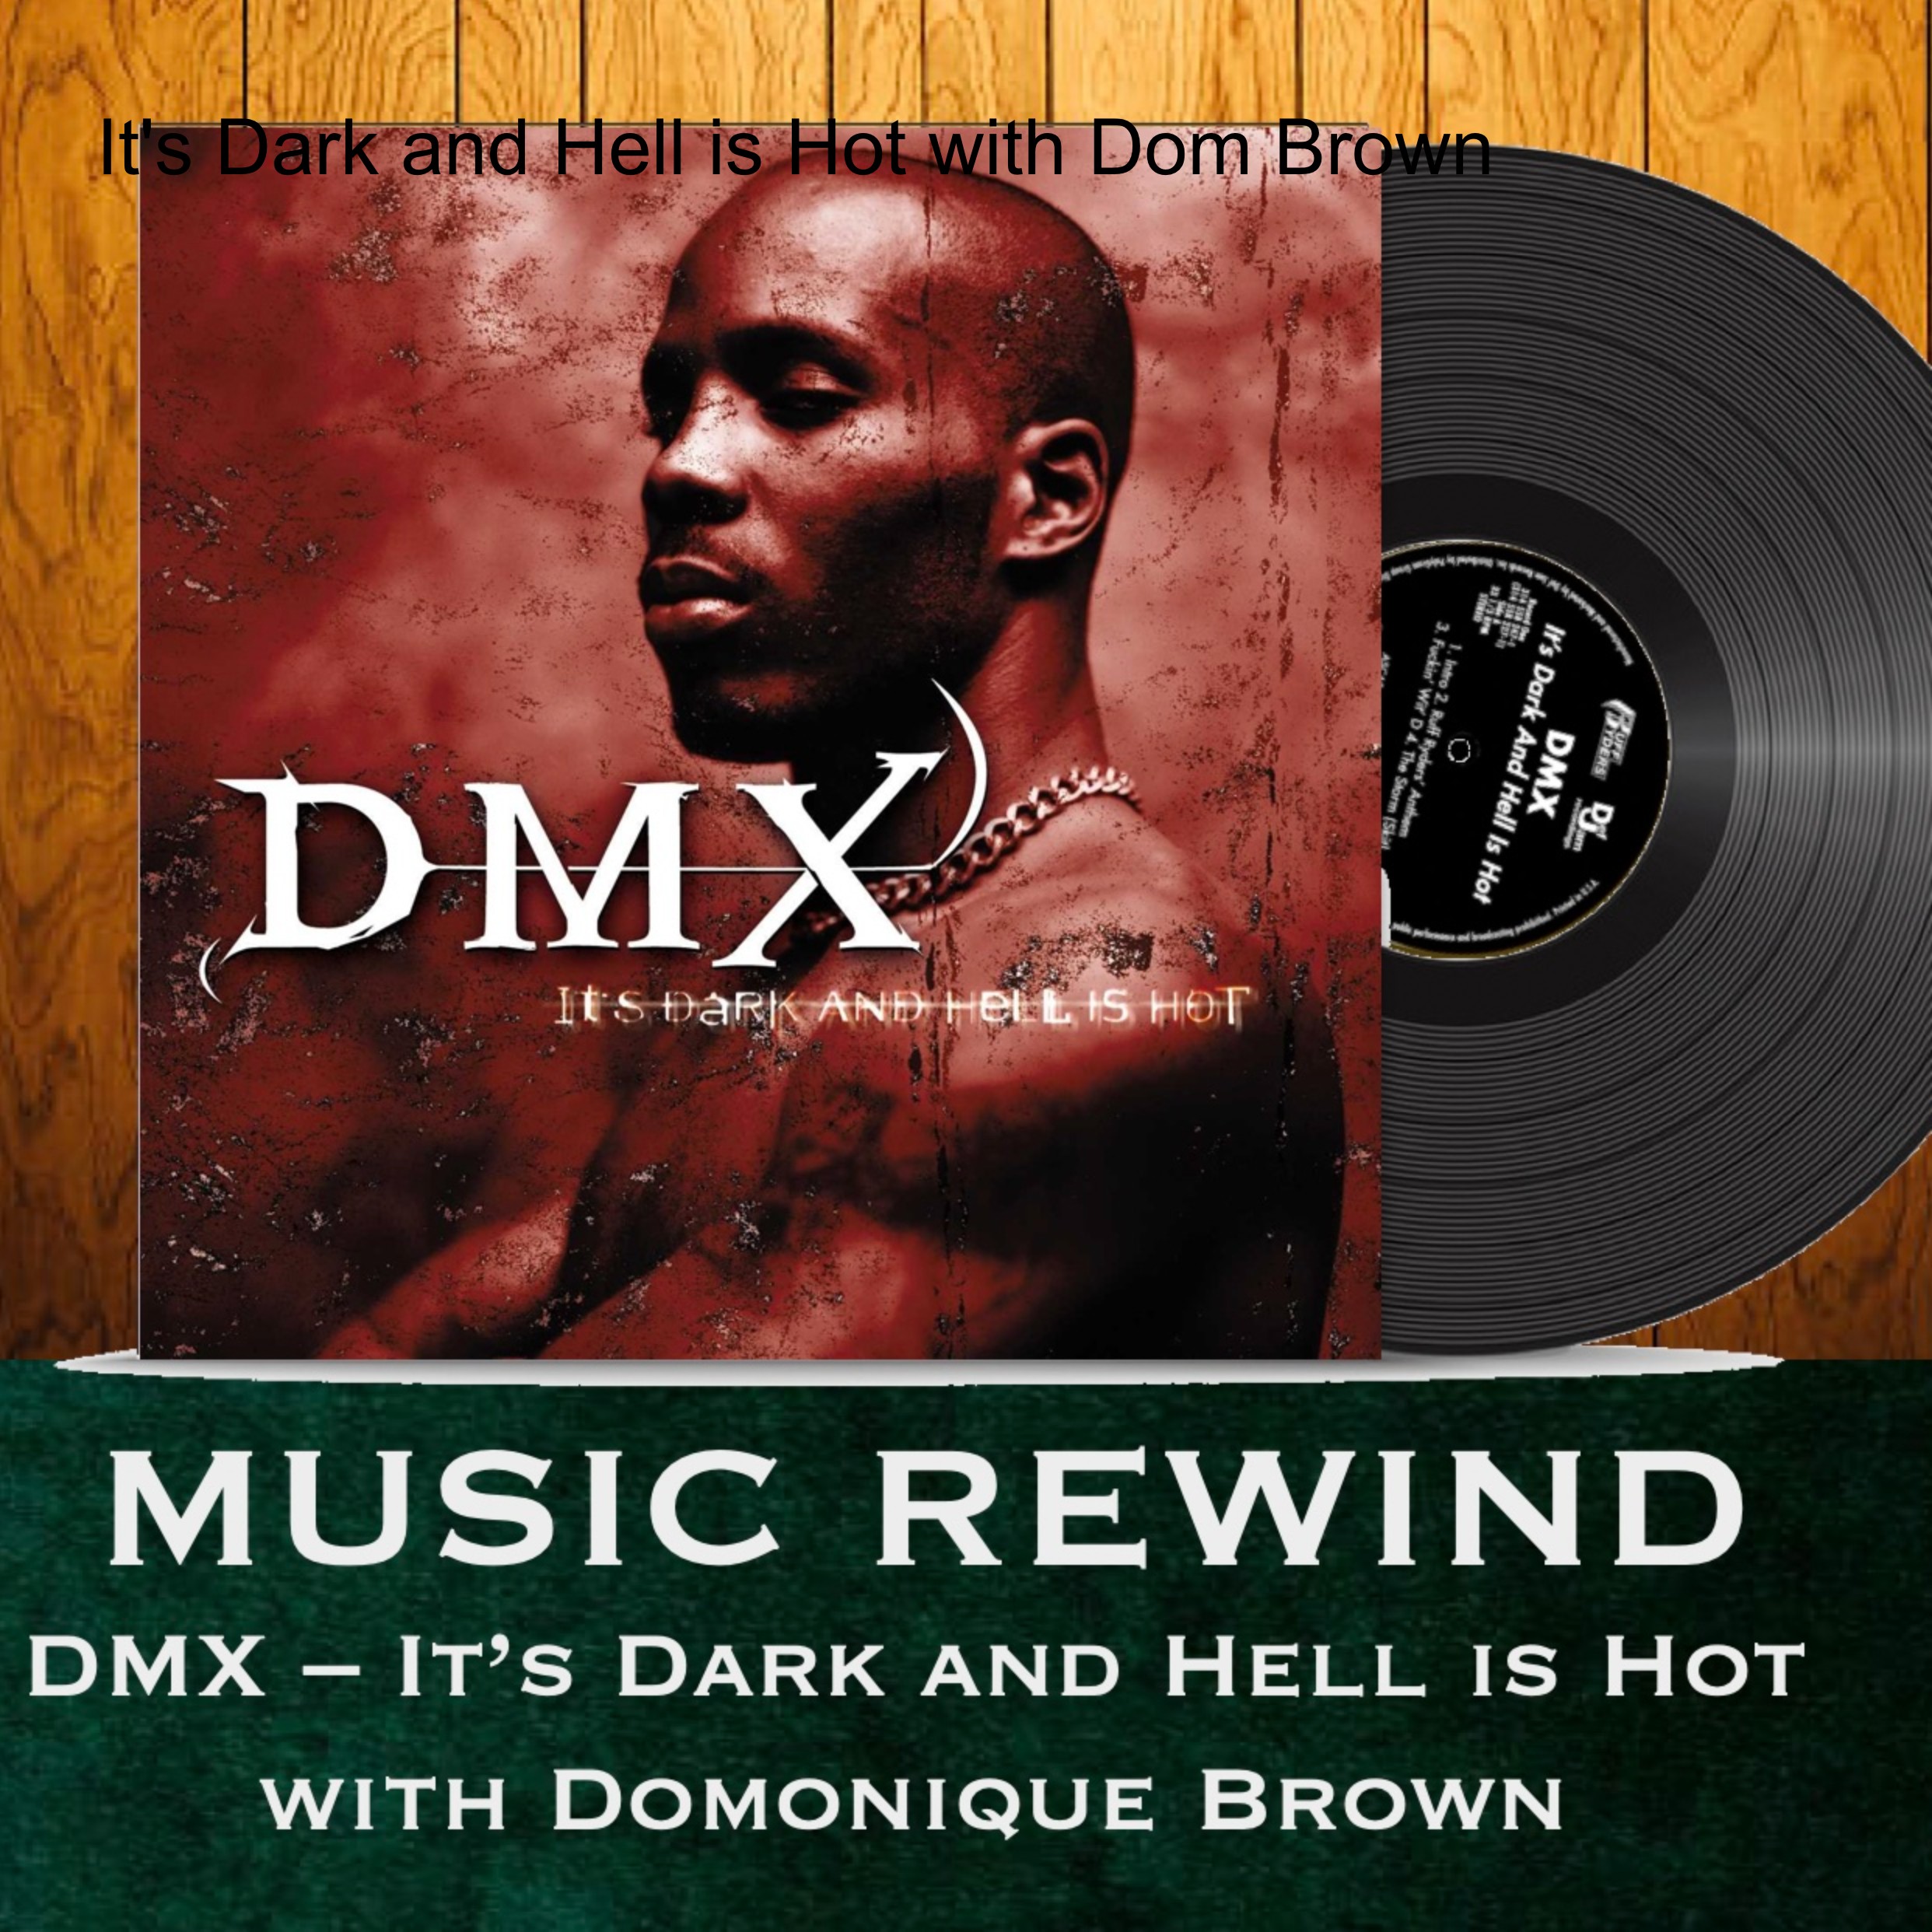 DMX: It‘s Dark and Hell is Hot with Dom Brown